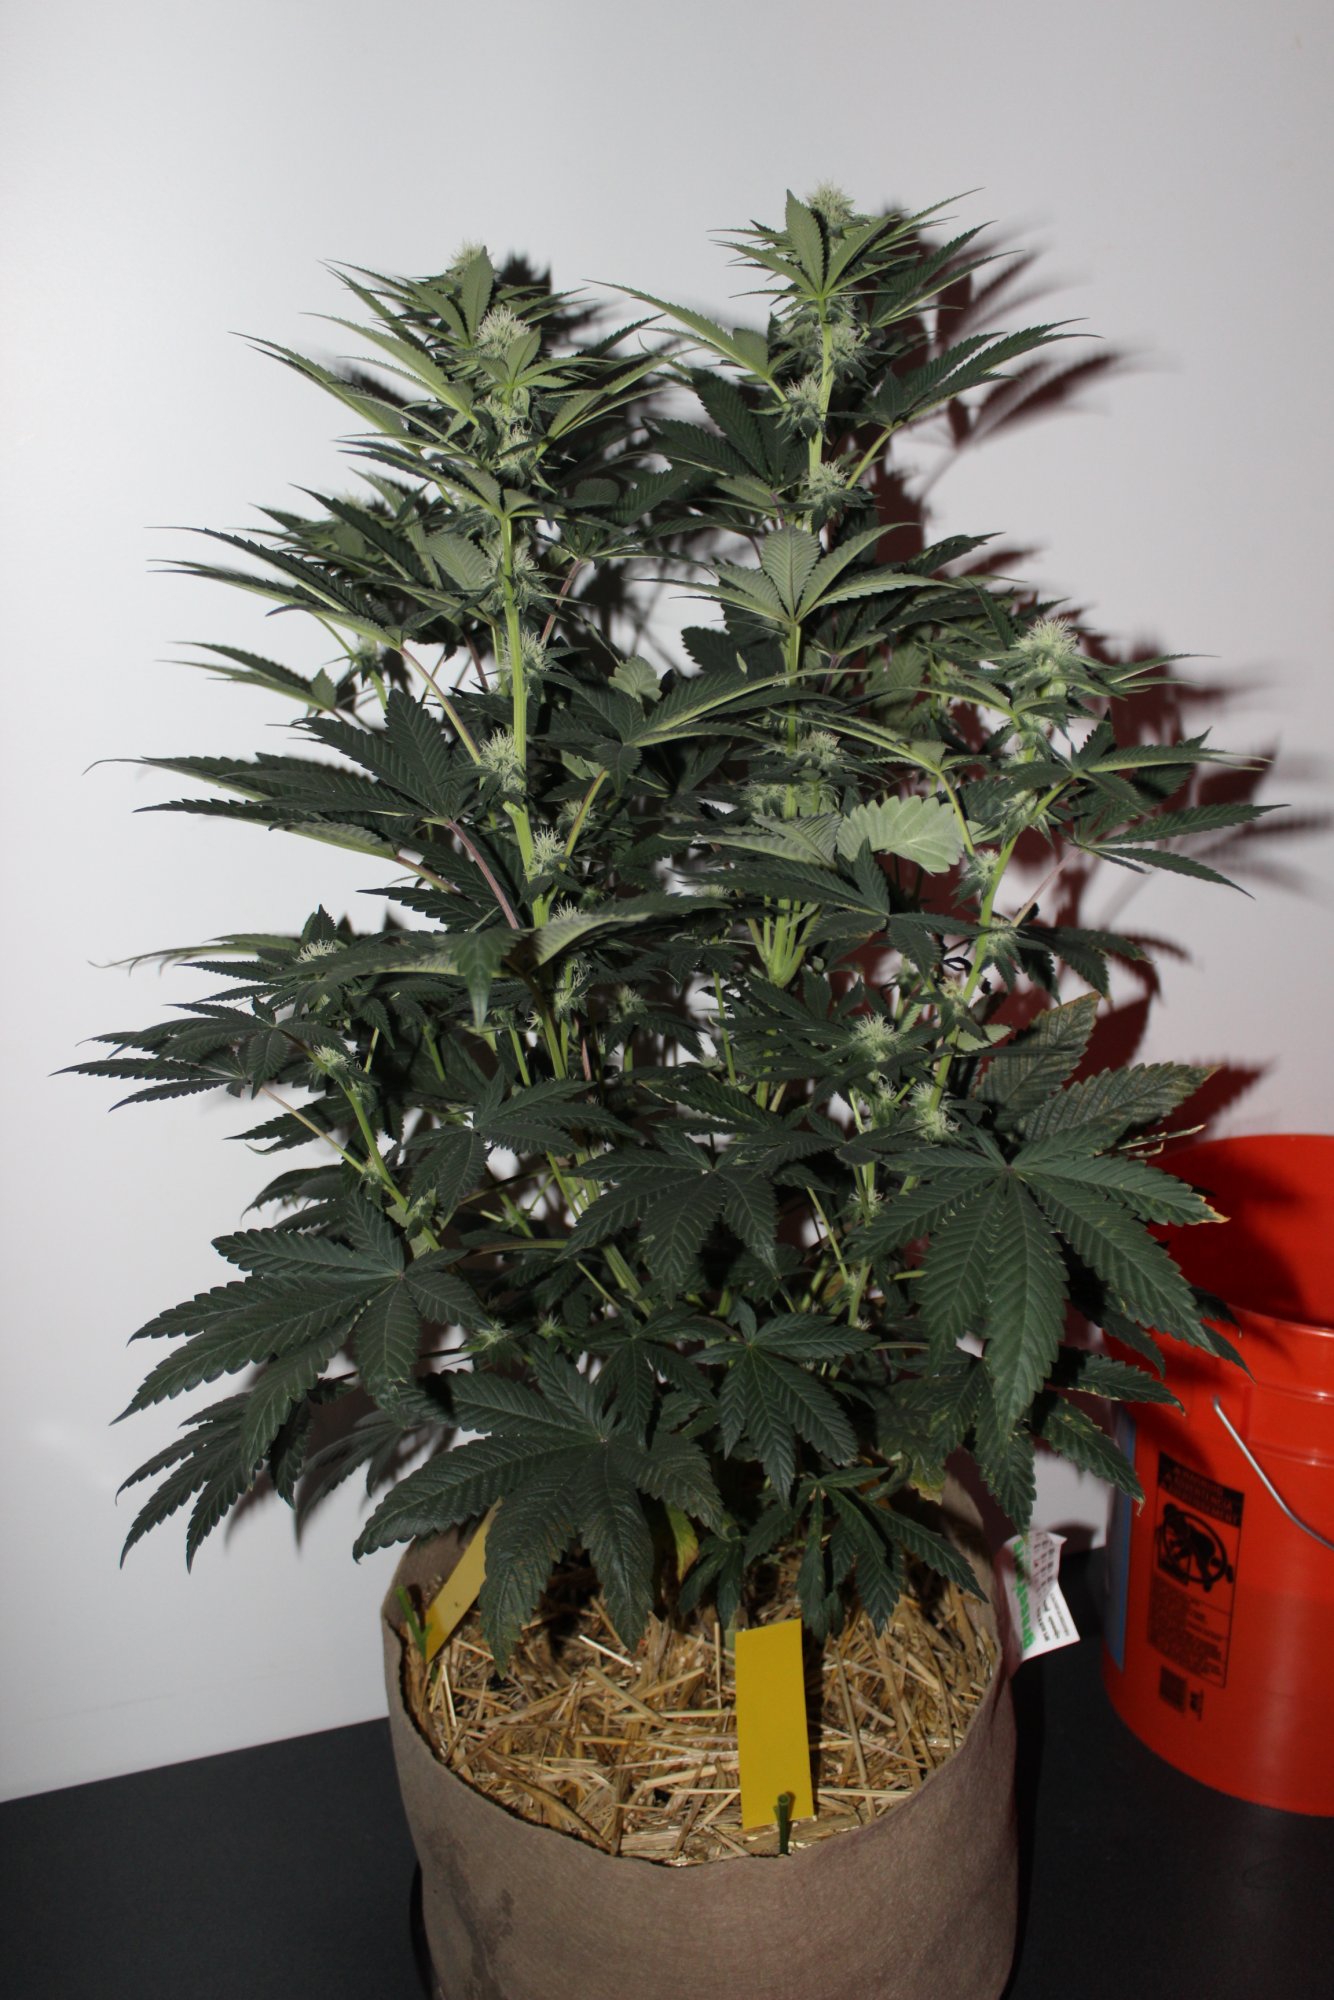 Time Bandit 6 flower day 21